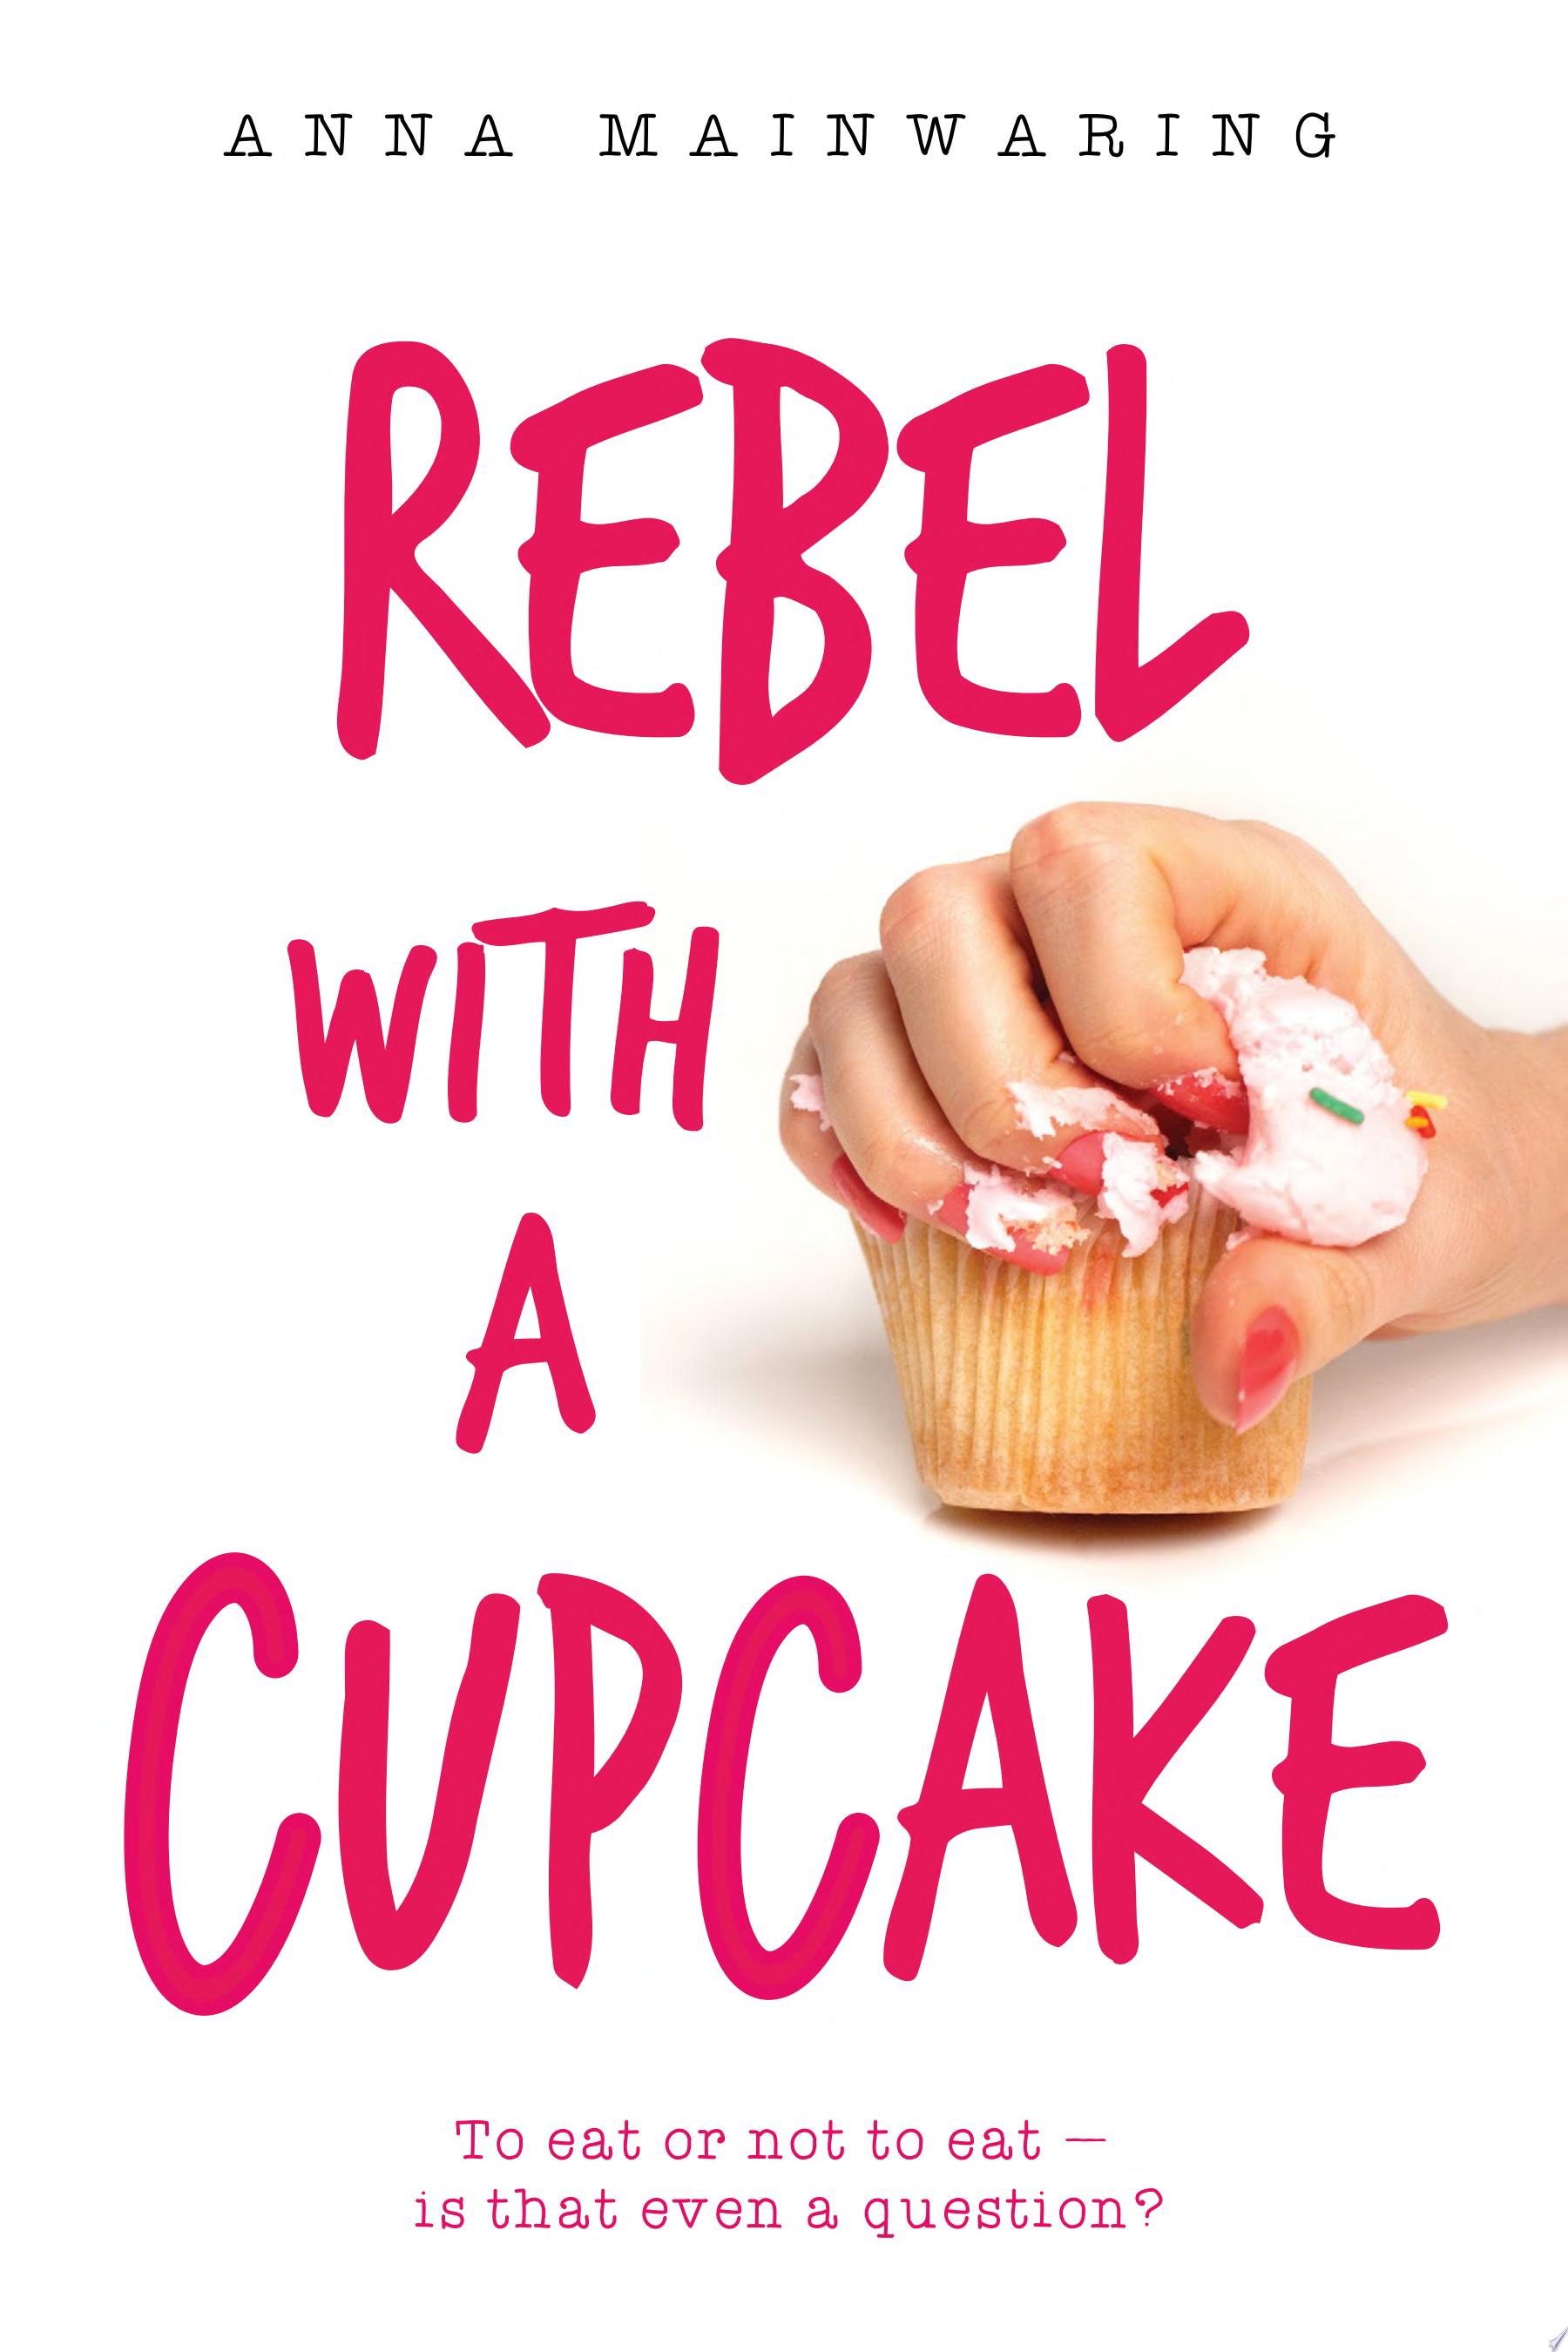 Image for "Rebel with a Cupcake"